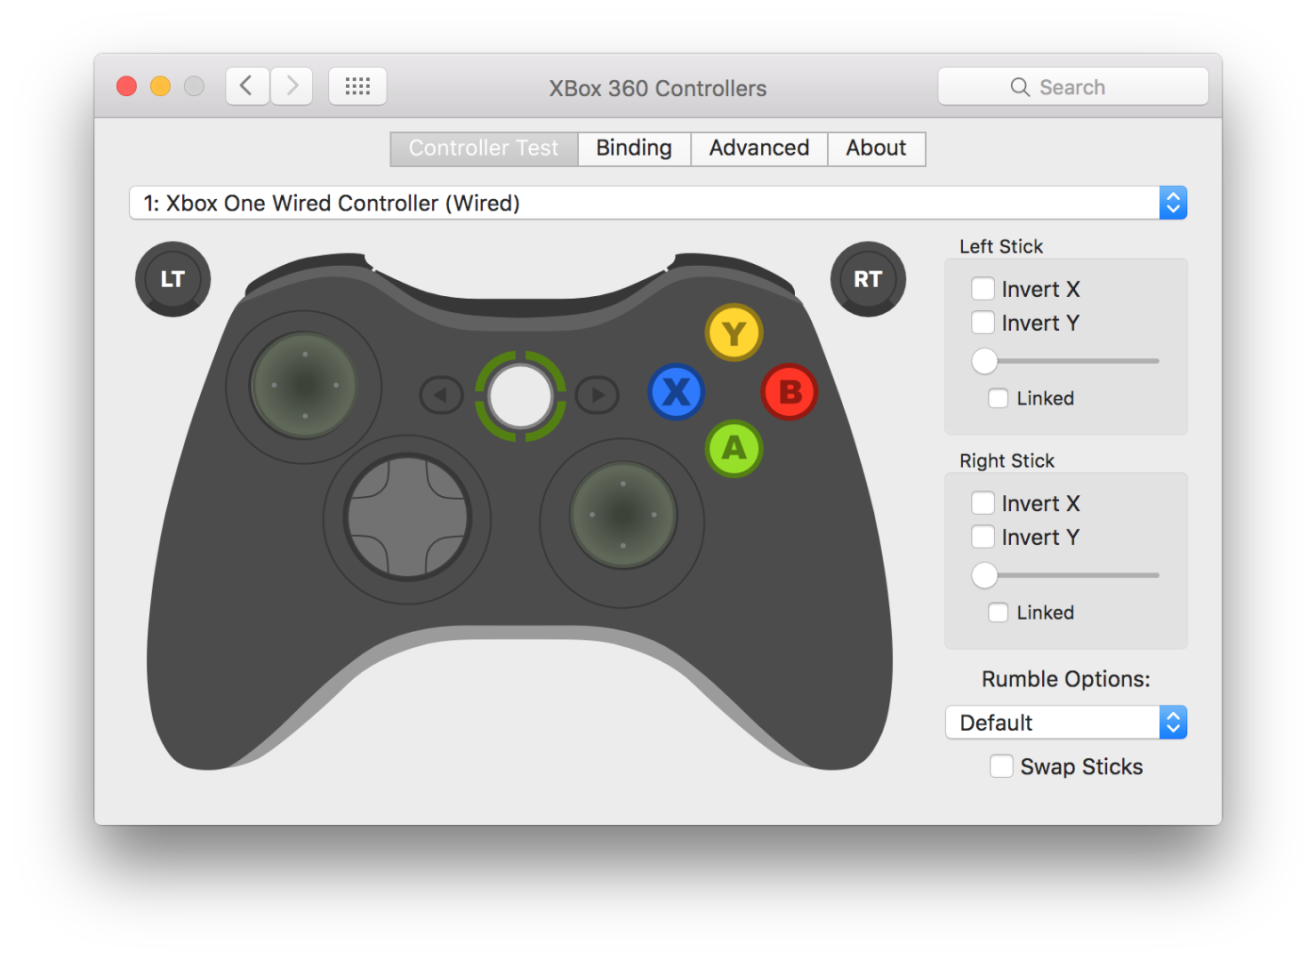 Xbox One Controller Mac Download